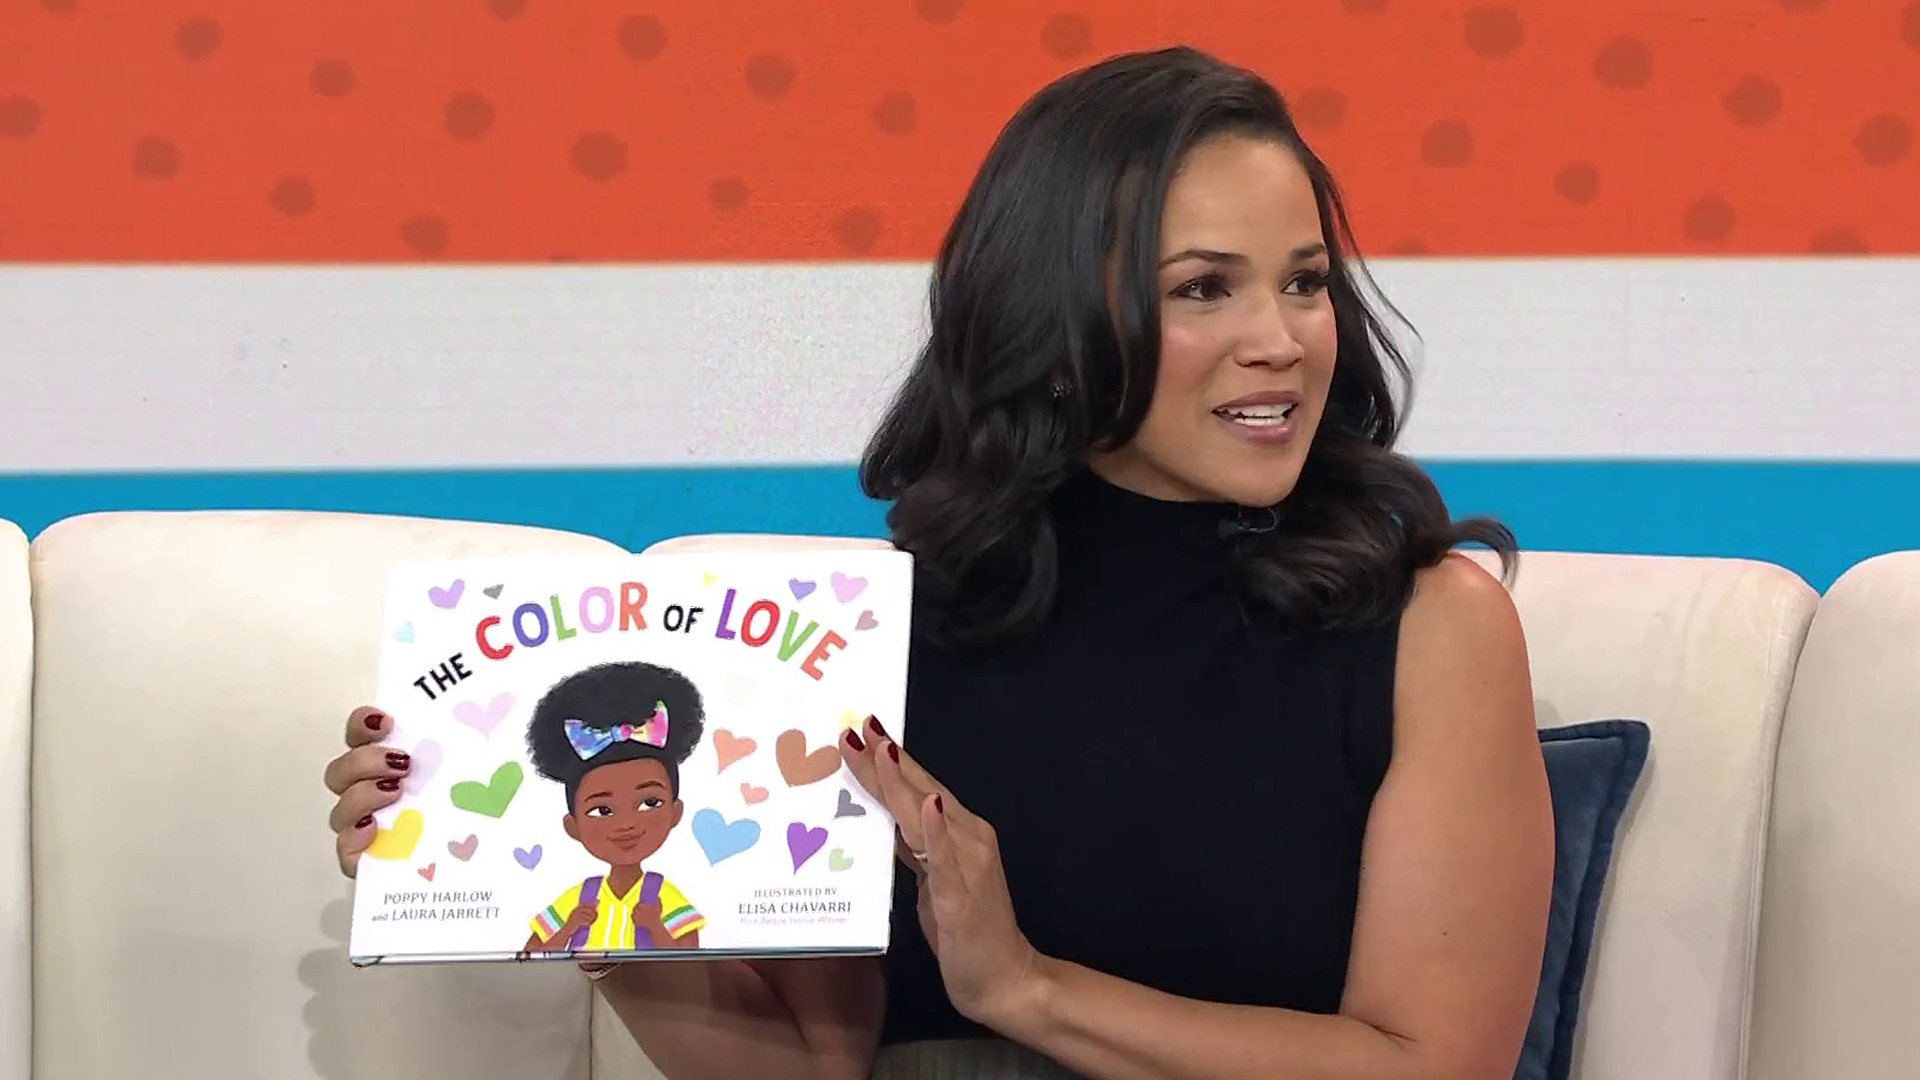 Laura Jarrett shares children's book called 'The Color of Love'